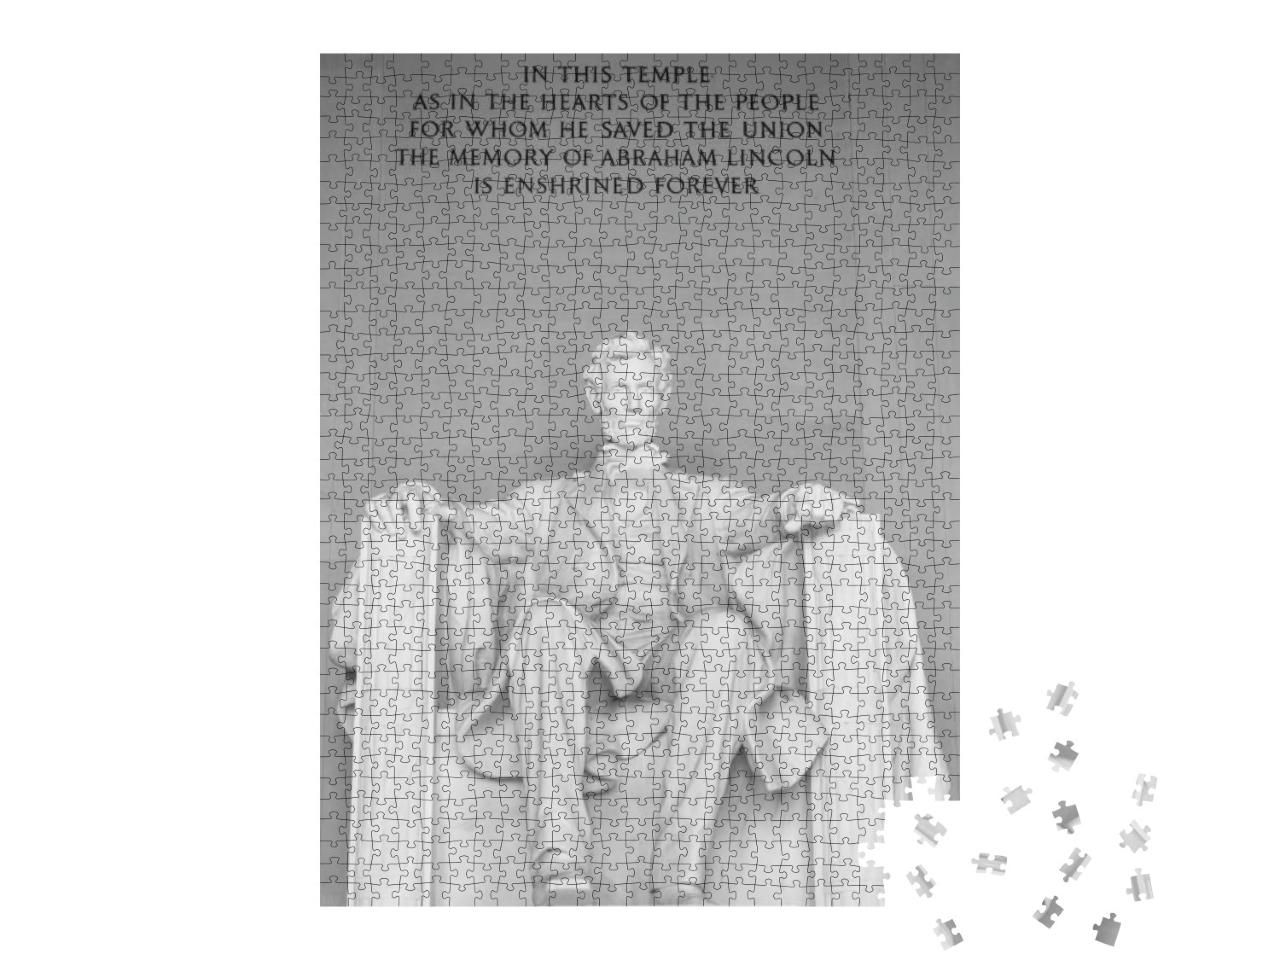 Abraham Lincoln Statue Detail At Lincoln Memorial - Washi... Jigsaw Puzzle with 1000 pieces